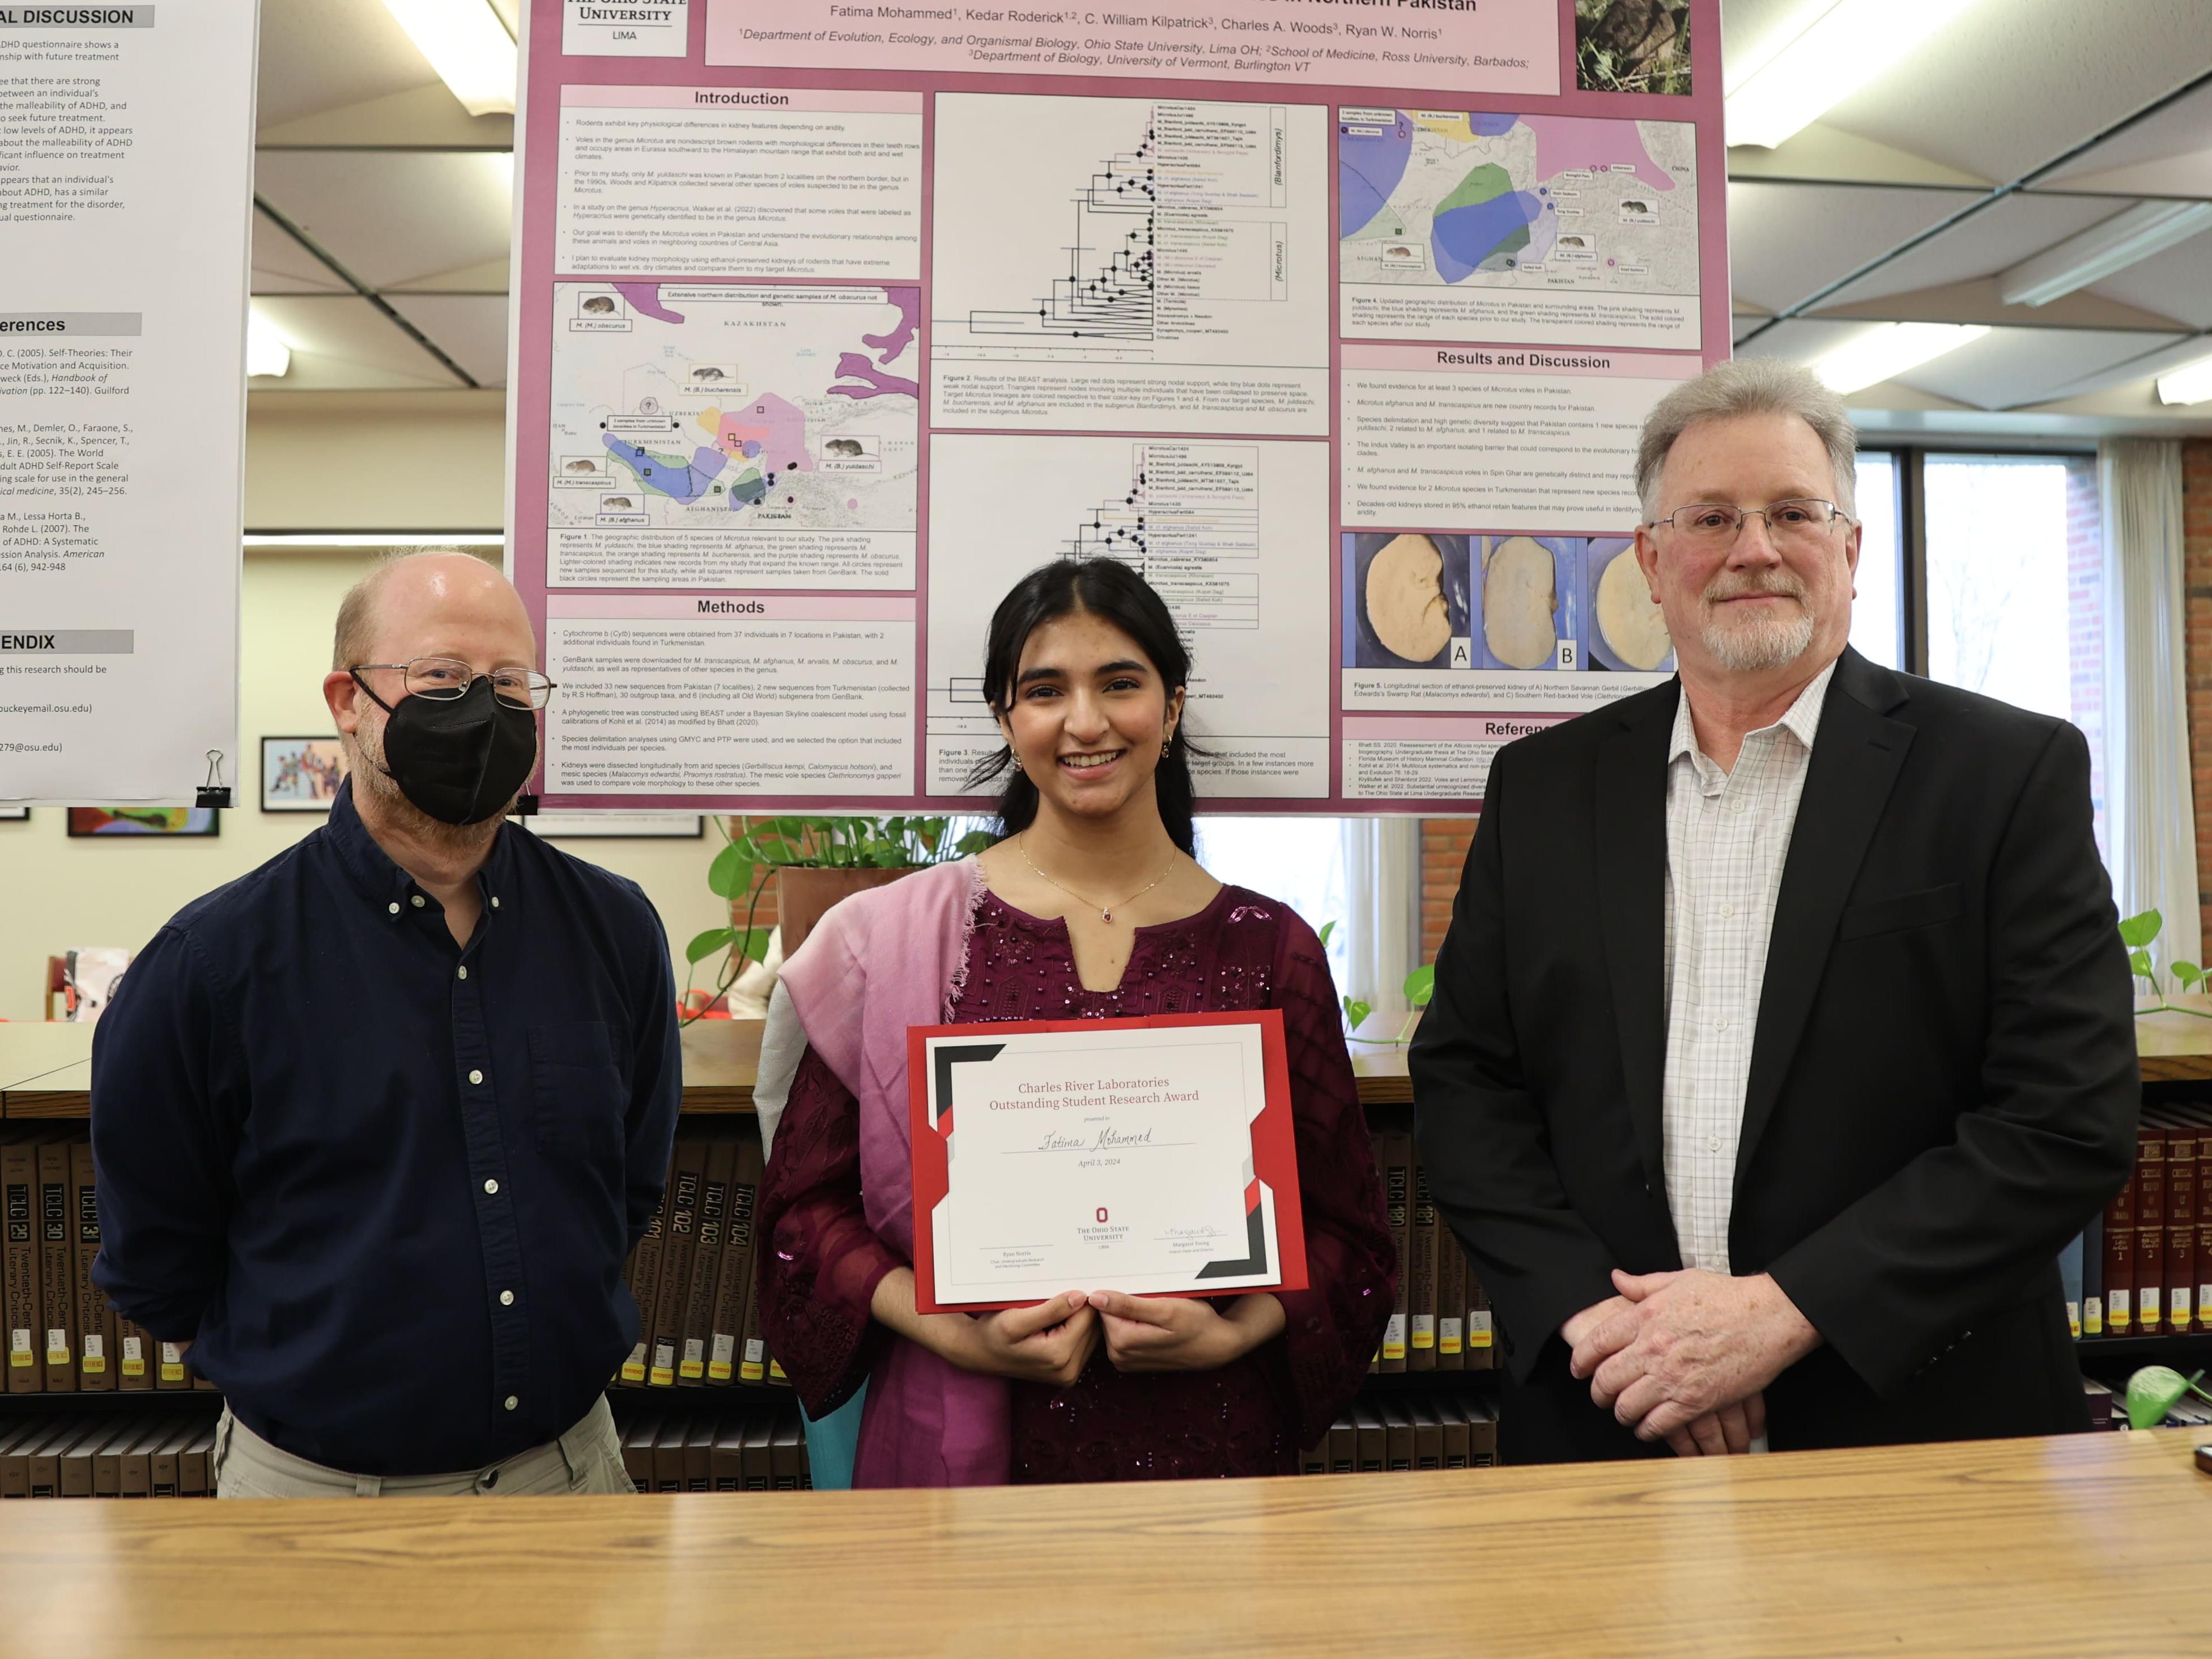 Undergraduate researcher Fatima Mohammed with mentor Ryan Norris and Charles River's Rusty Rush